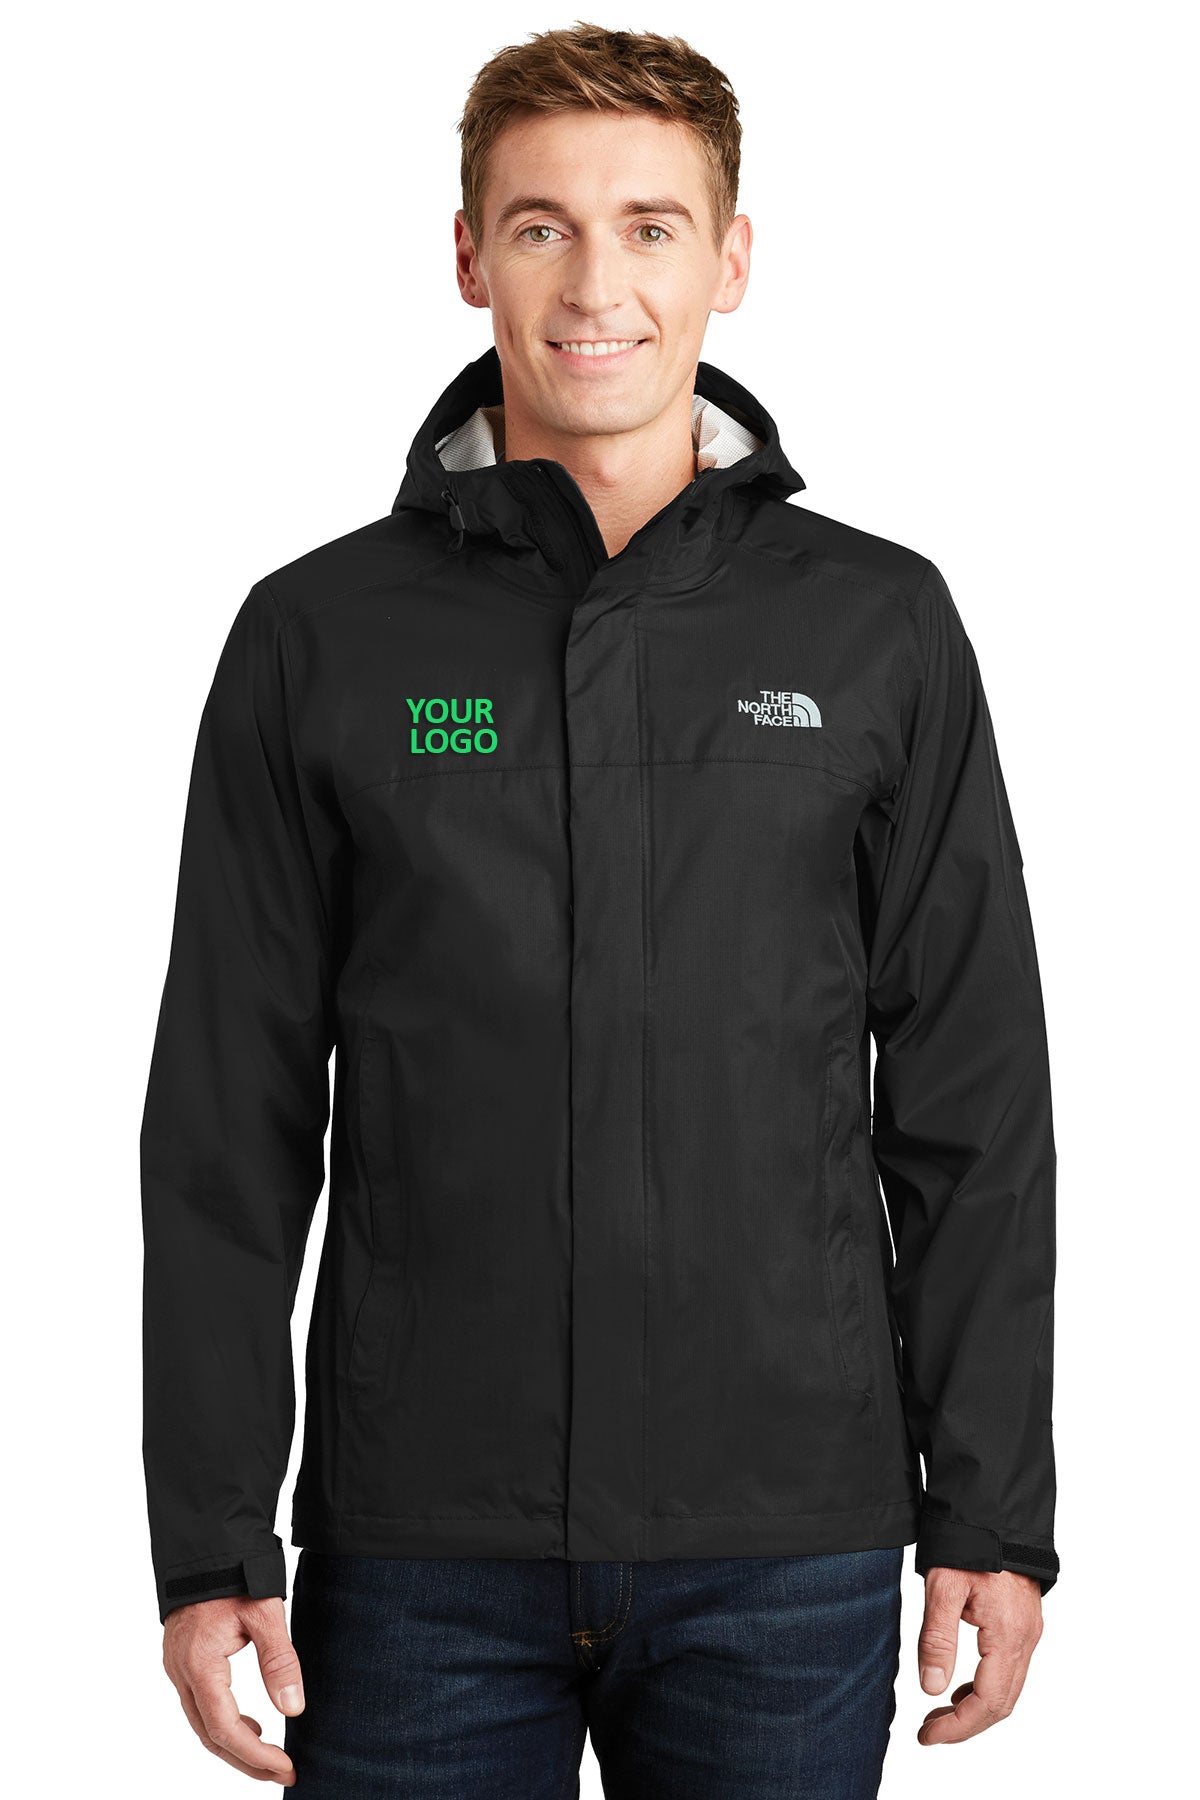 The North Face TNF Black NF0A3LH4 promotional jackets company logo